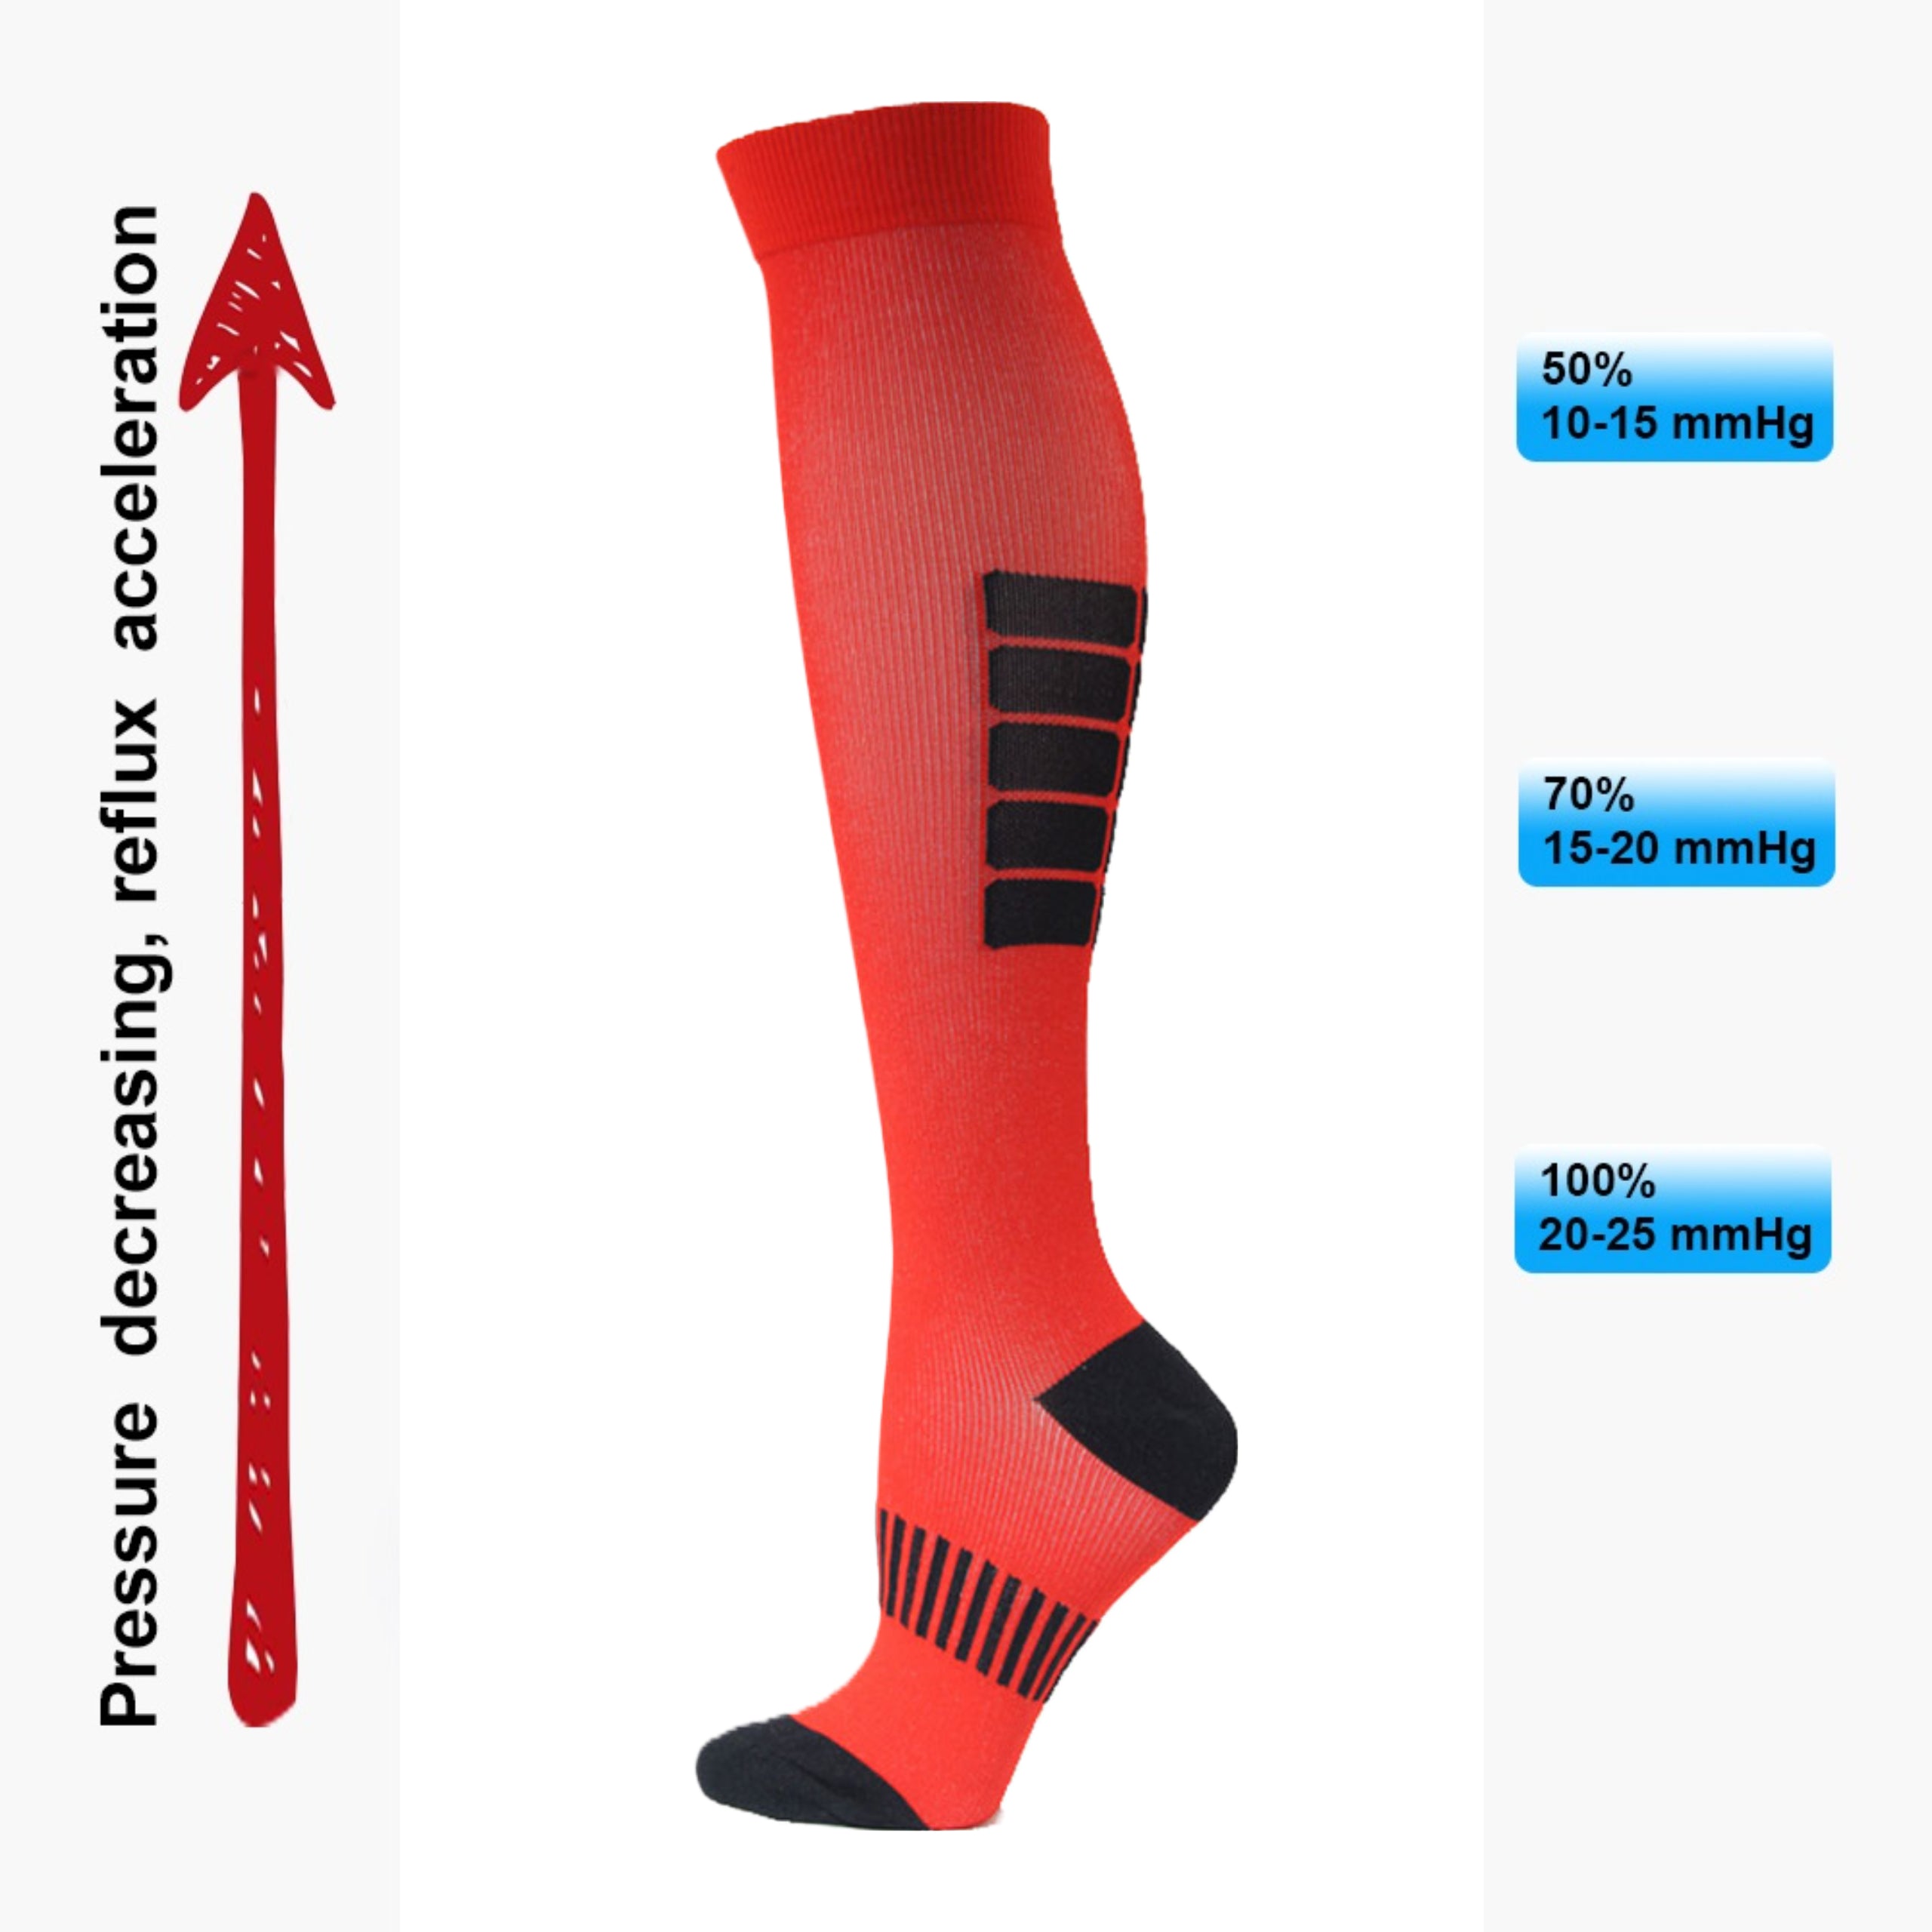 Red Athletic Knee High (Compression Socks)